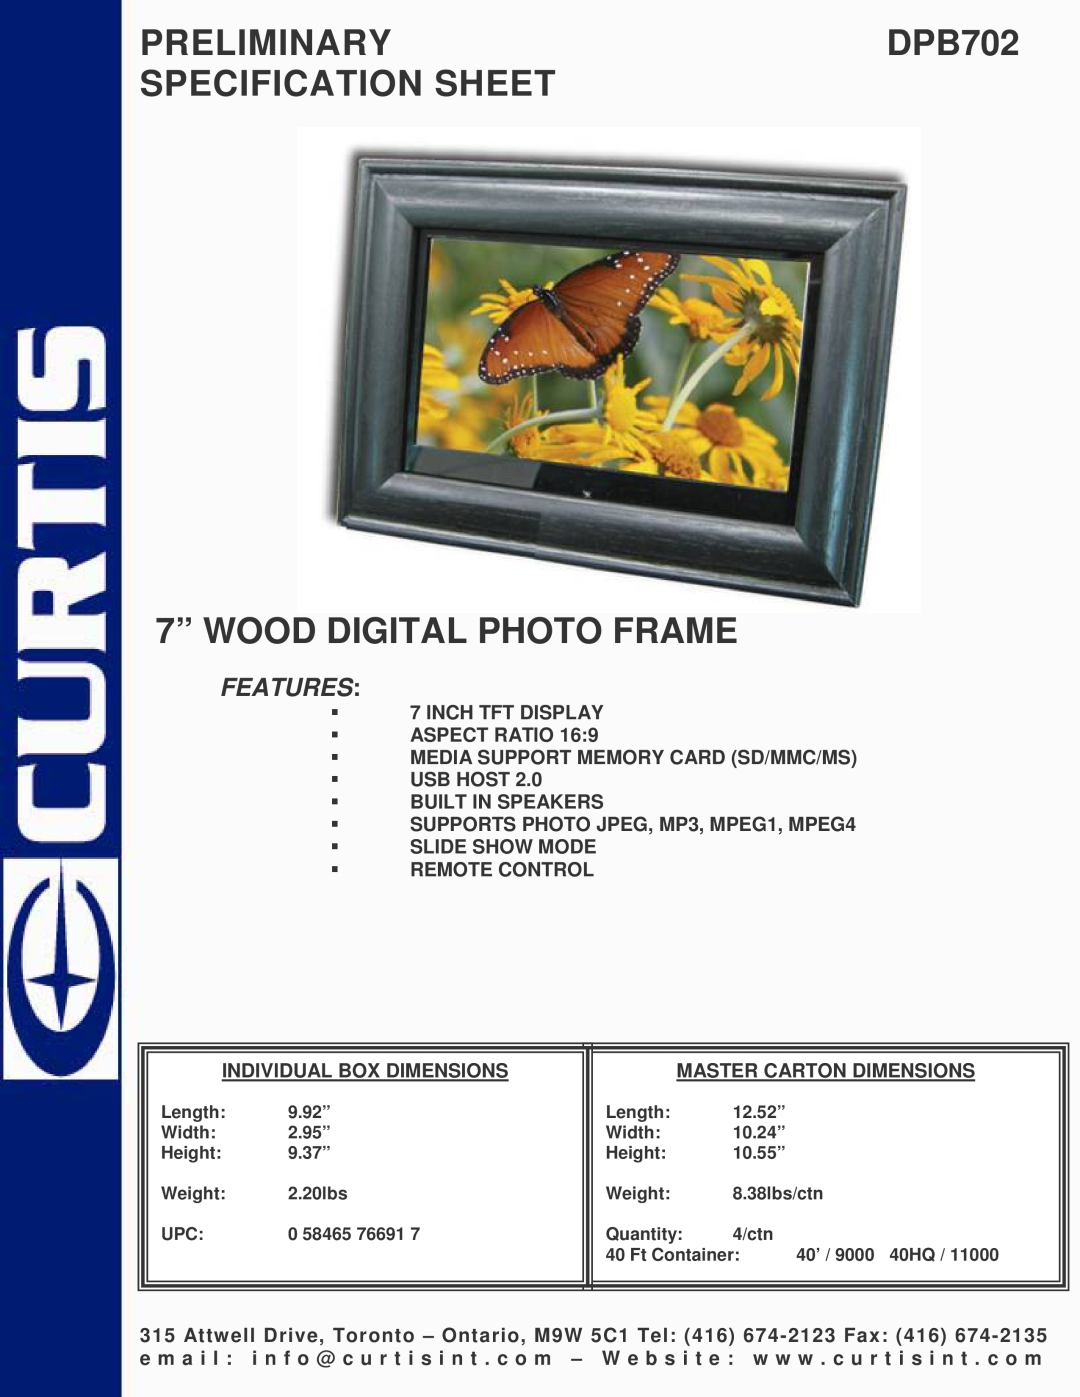 Curtis specifications PRELIMINARYDPB702 SPECIFICATION SHEET 7” WOOD DIGITAL PHOTO FRAME, Features 